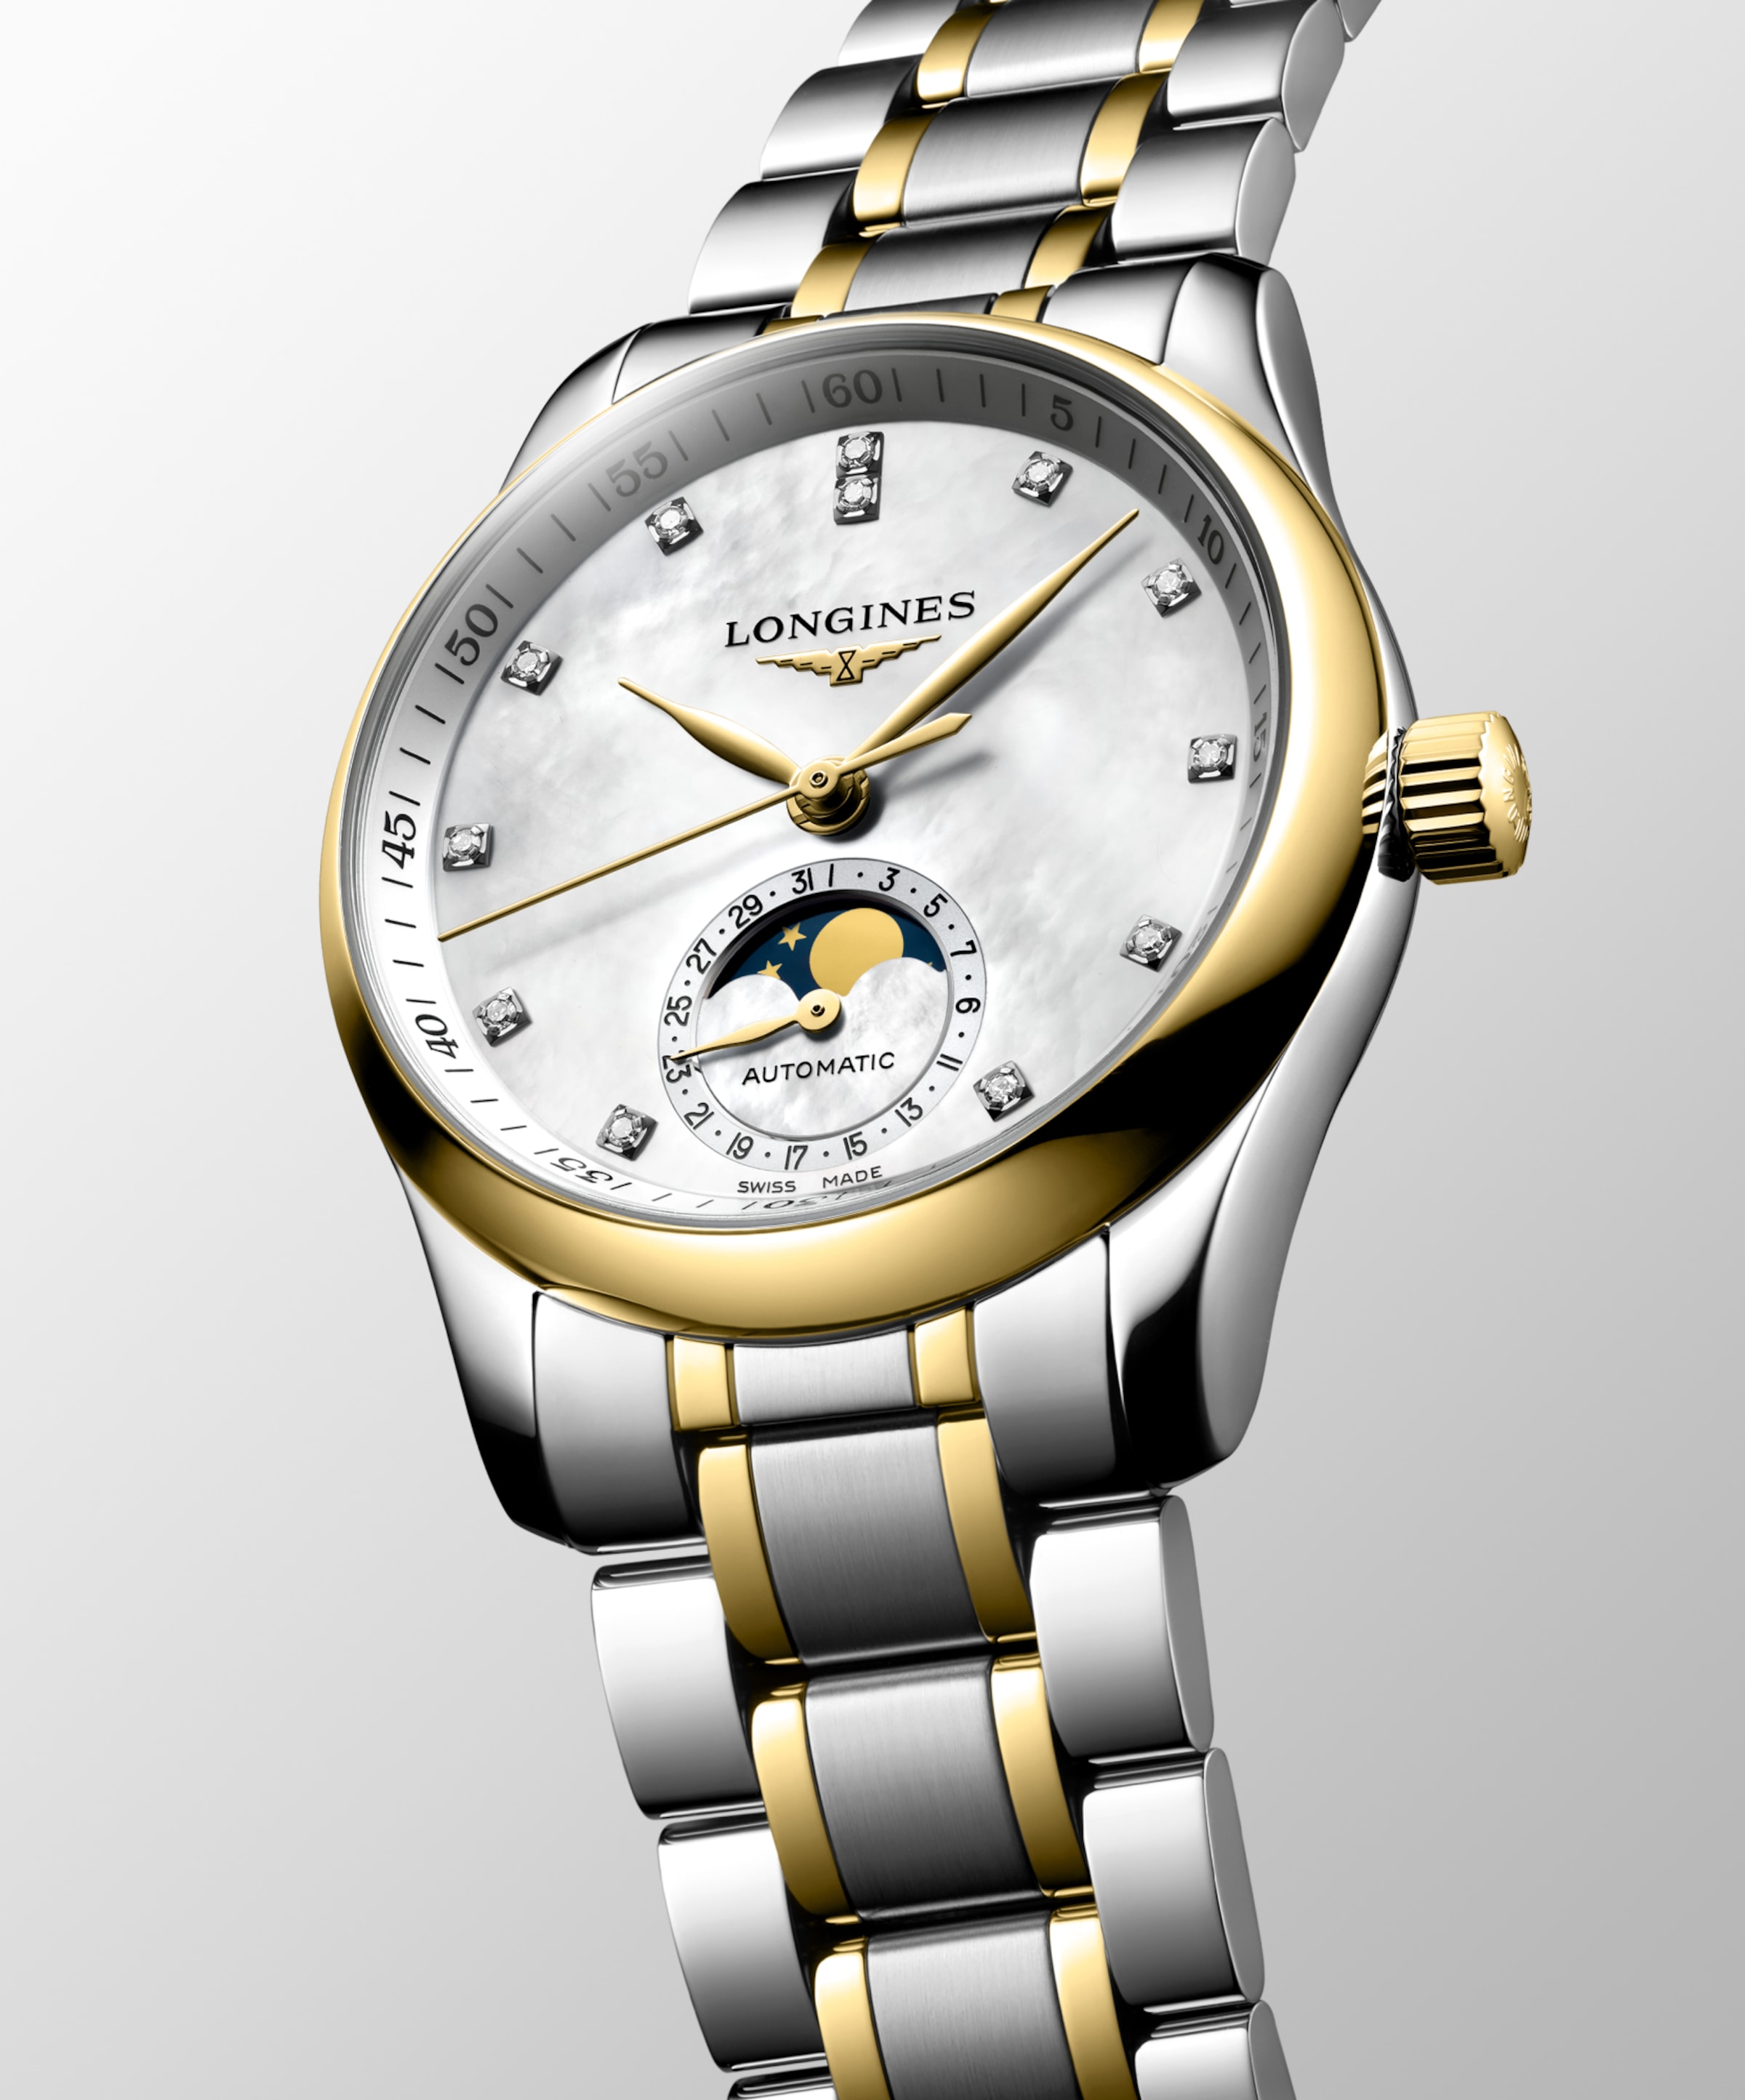 Longines MASTER COLLECTION Automatic Stainless steel and 18 karat yellow gold cap 200 Watch - L2.409.5.87.7